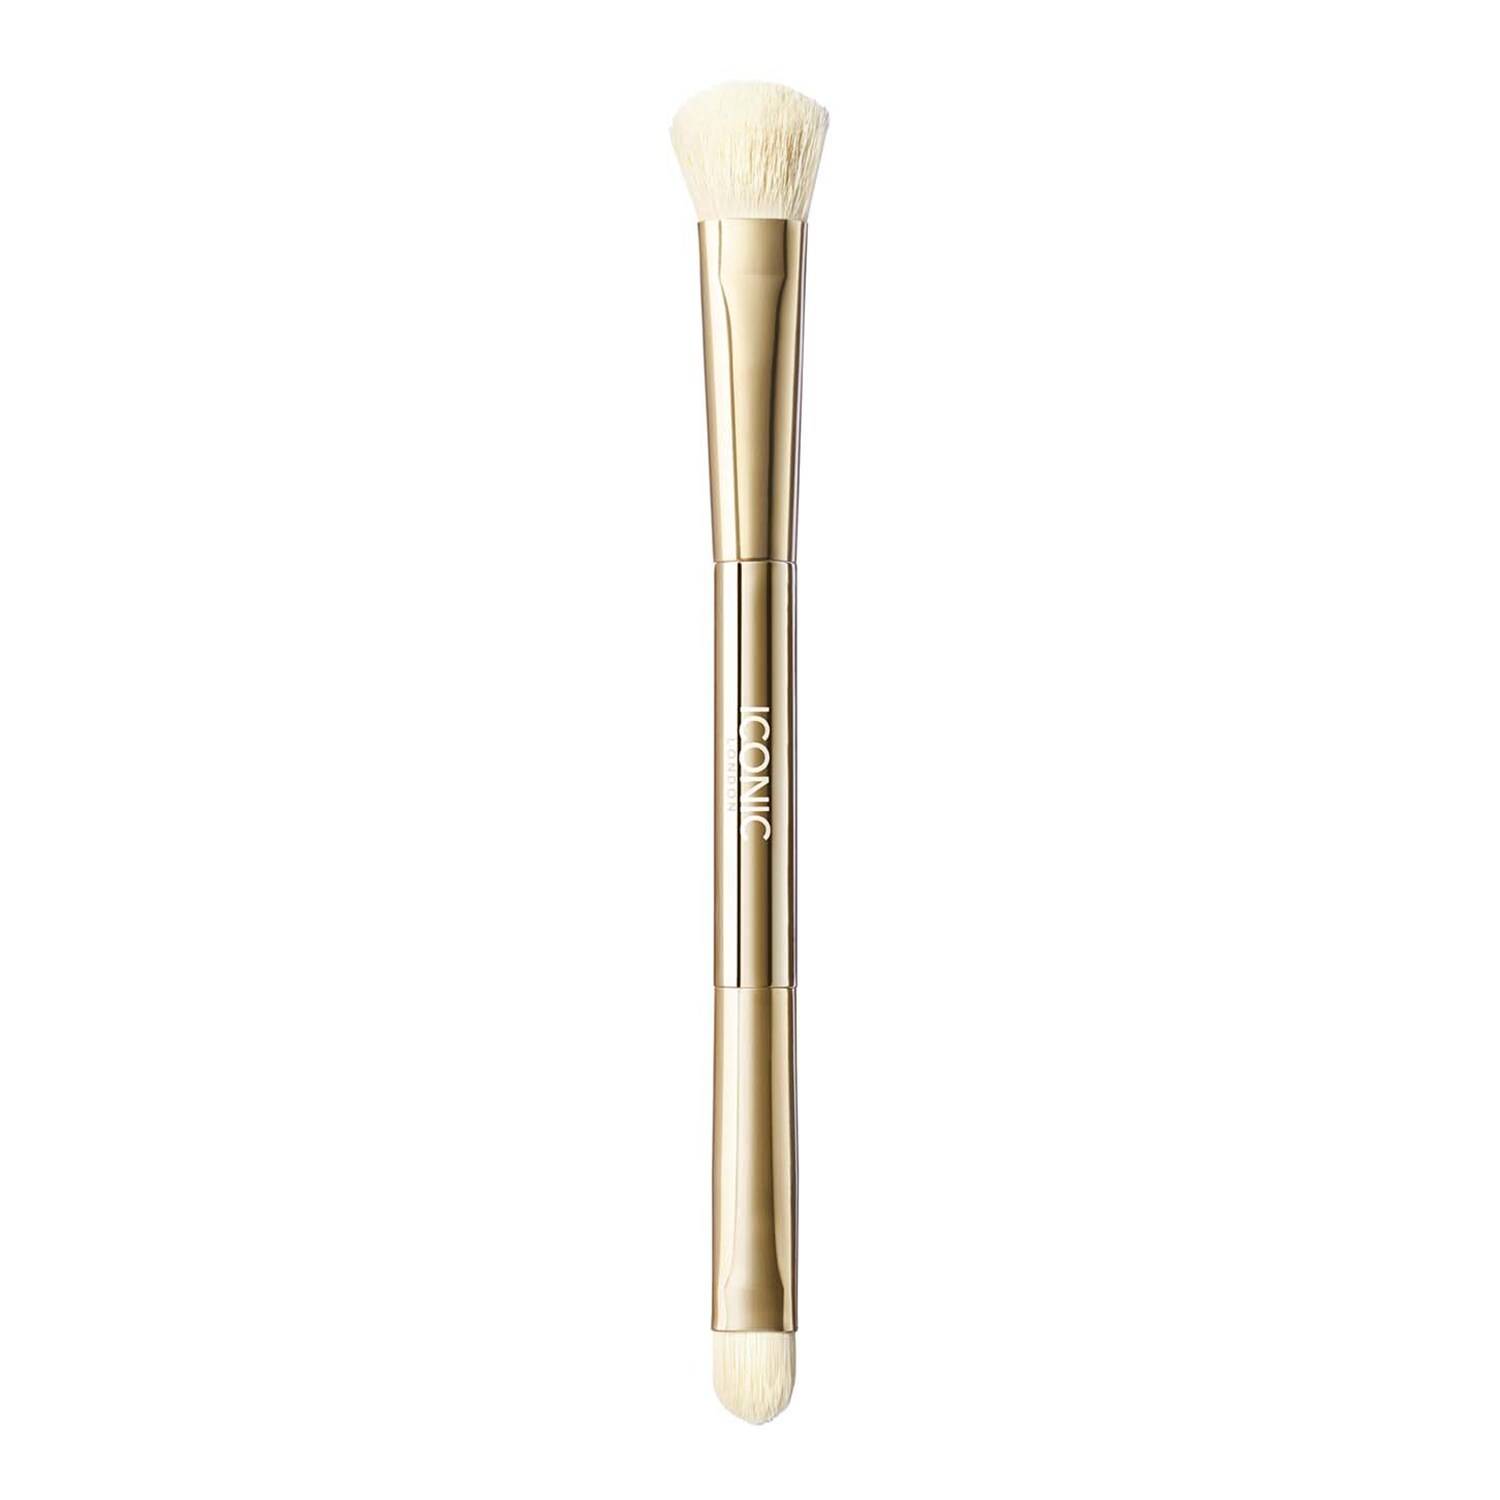 Iconic London Concealer Duo Brush